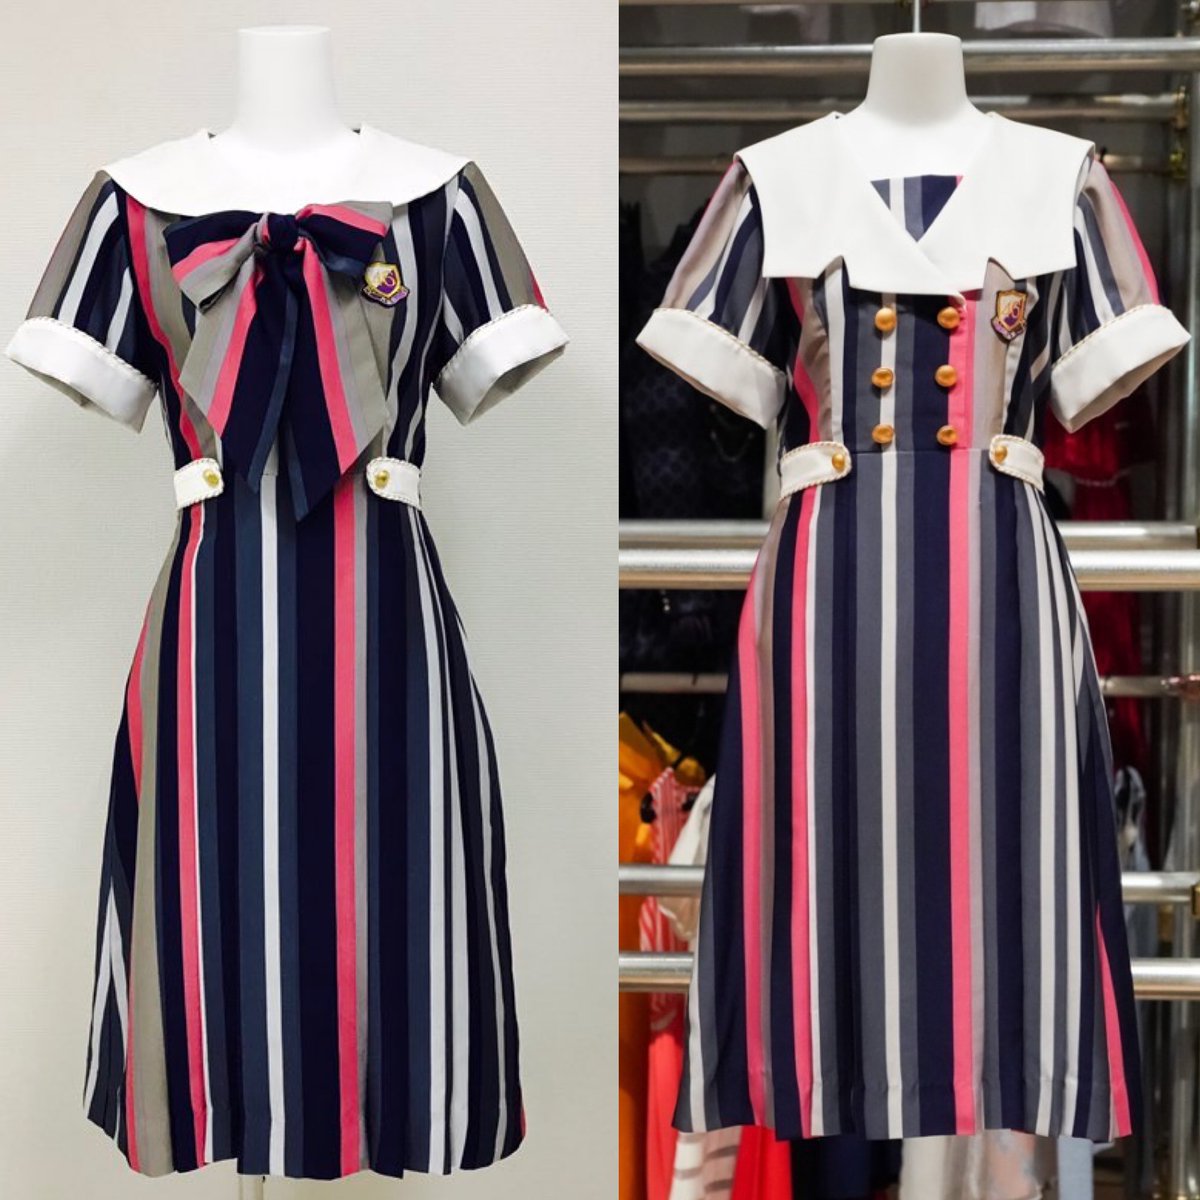 11 ⊿ 21st Single Uniform(Sorry skipped a number)Designed by MURRAL, the theme of this dress is "vintage marine." The retro-colored stripes, ribbons, and gold buttons are chic and refreshing for the summer. https://twitter.com/korobizaka/status/1272229066423369729?s=20